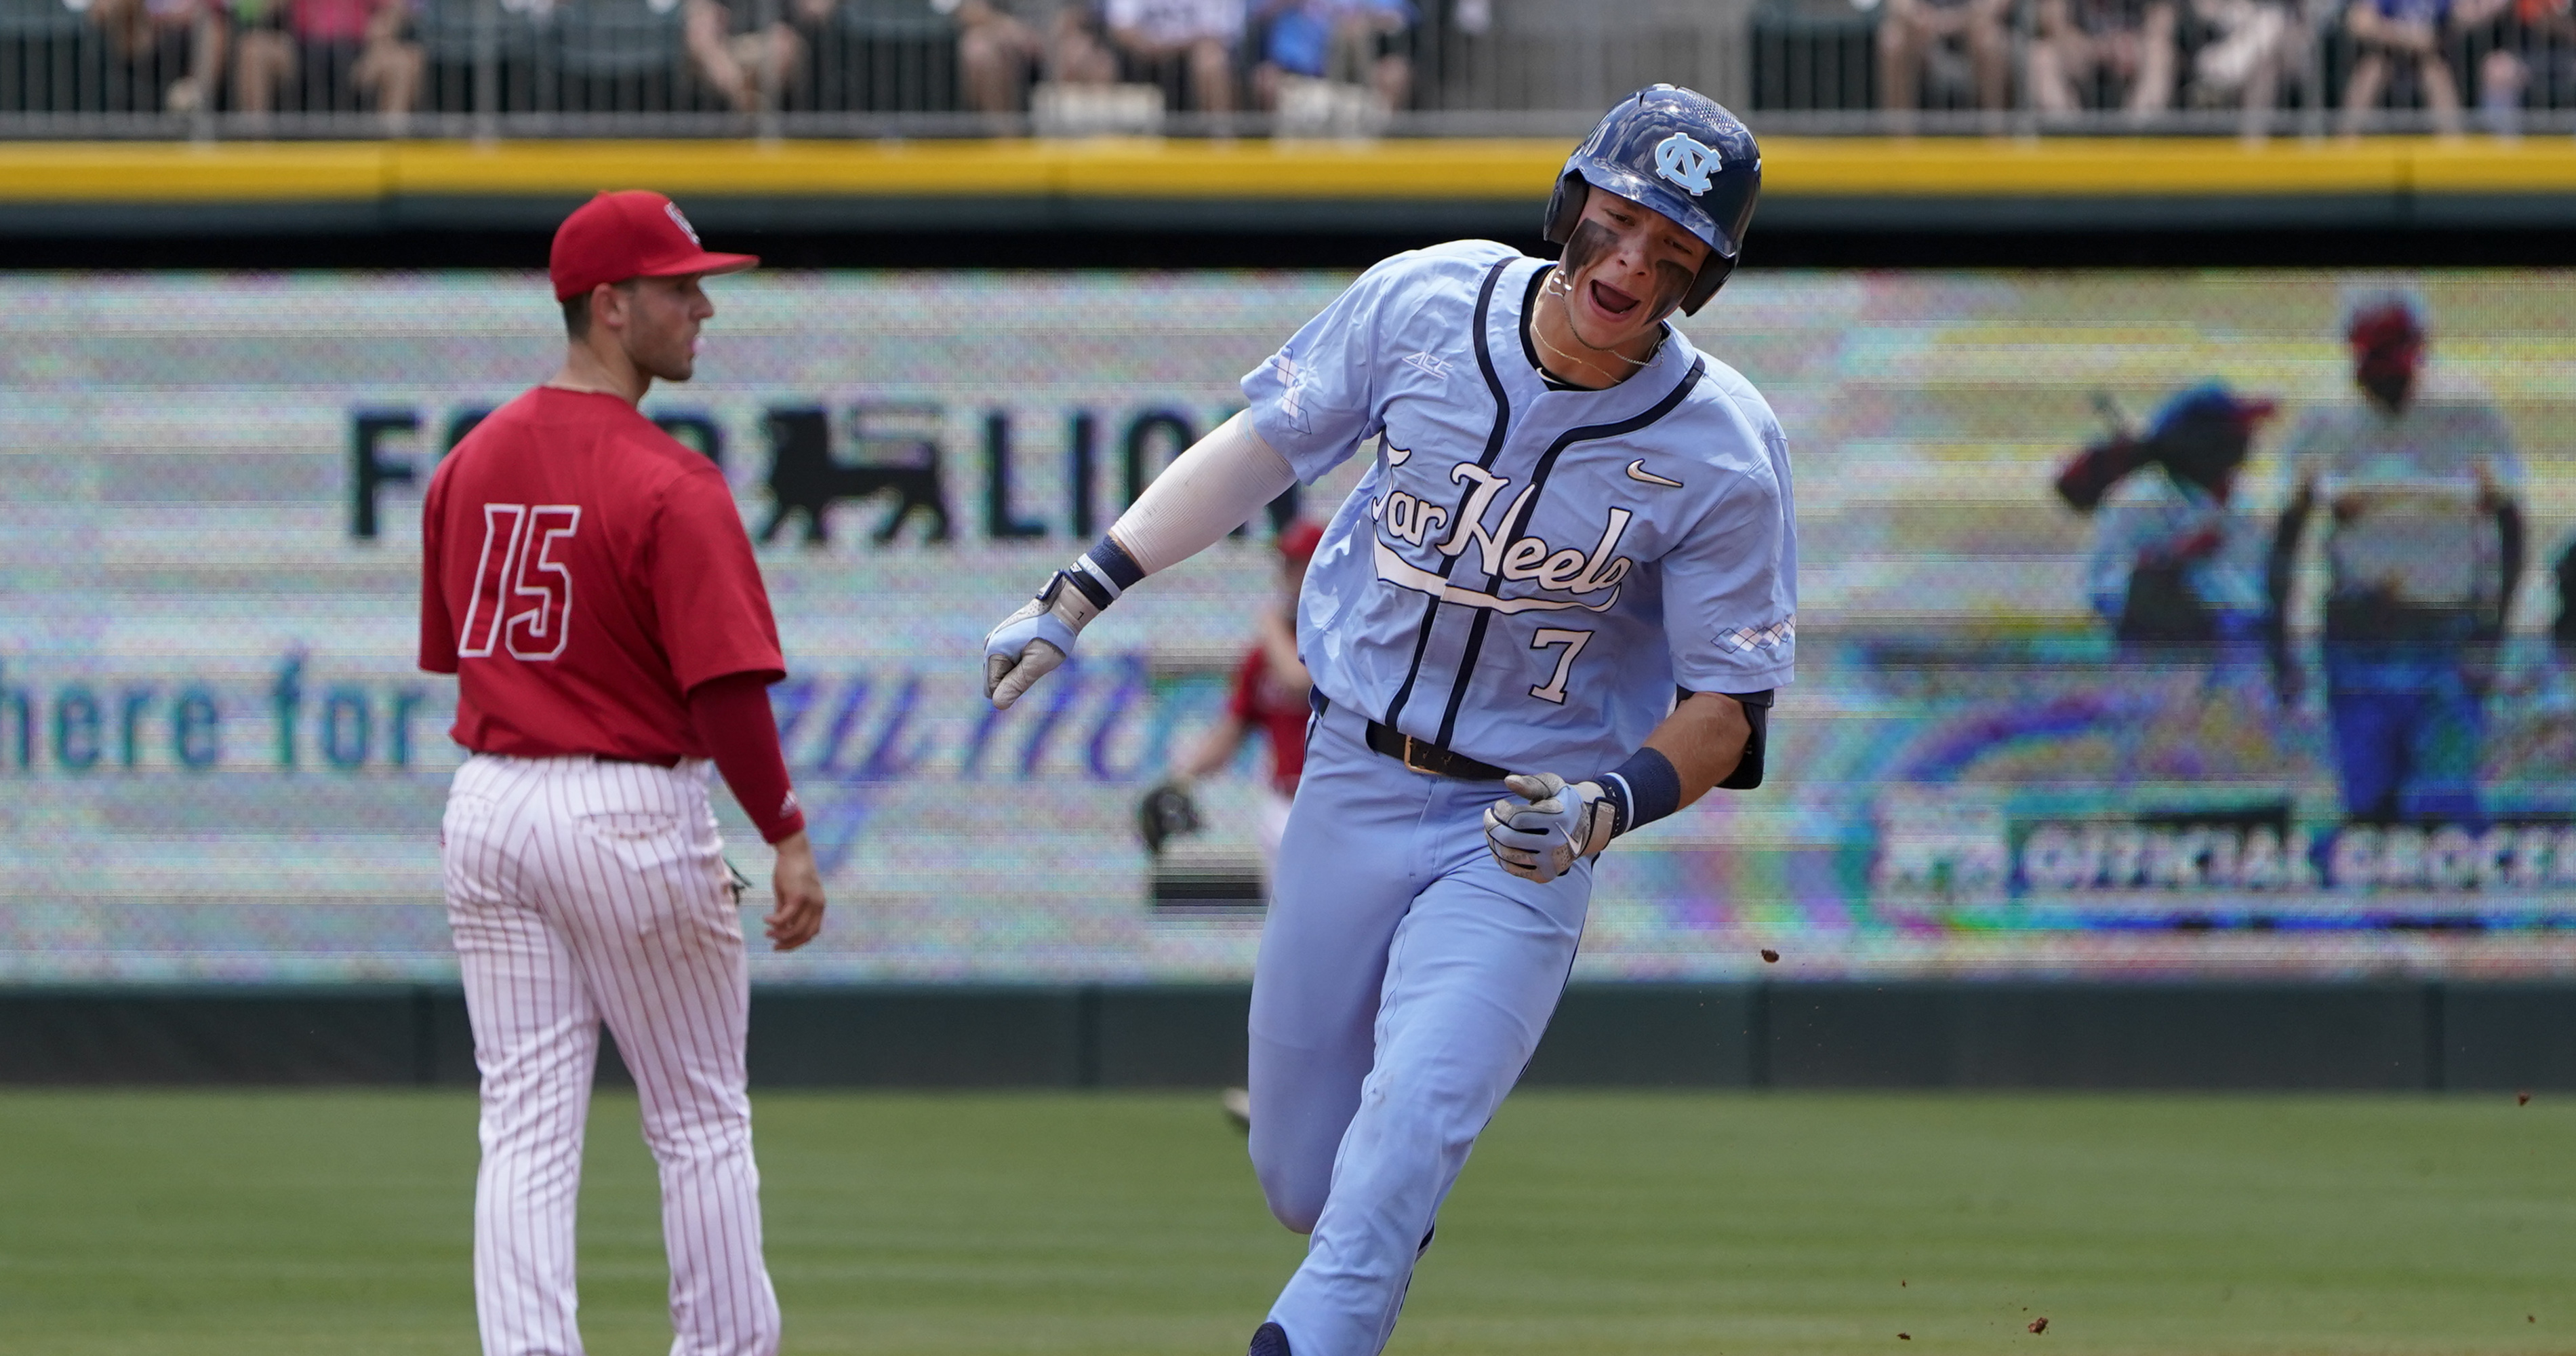 ACC Baseball Championship 2022: Vance Honeycutt Homers Twice as UNC  Clinches Title, News, Scores, Highlights, Stats, and Rumors